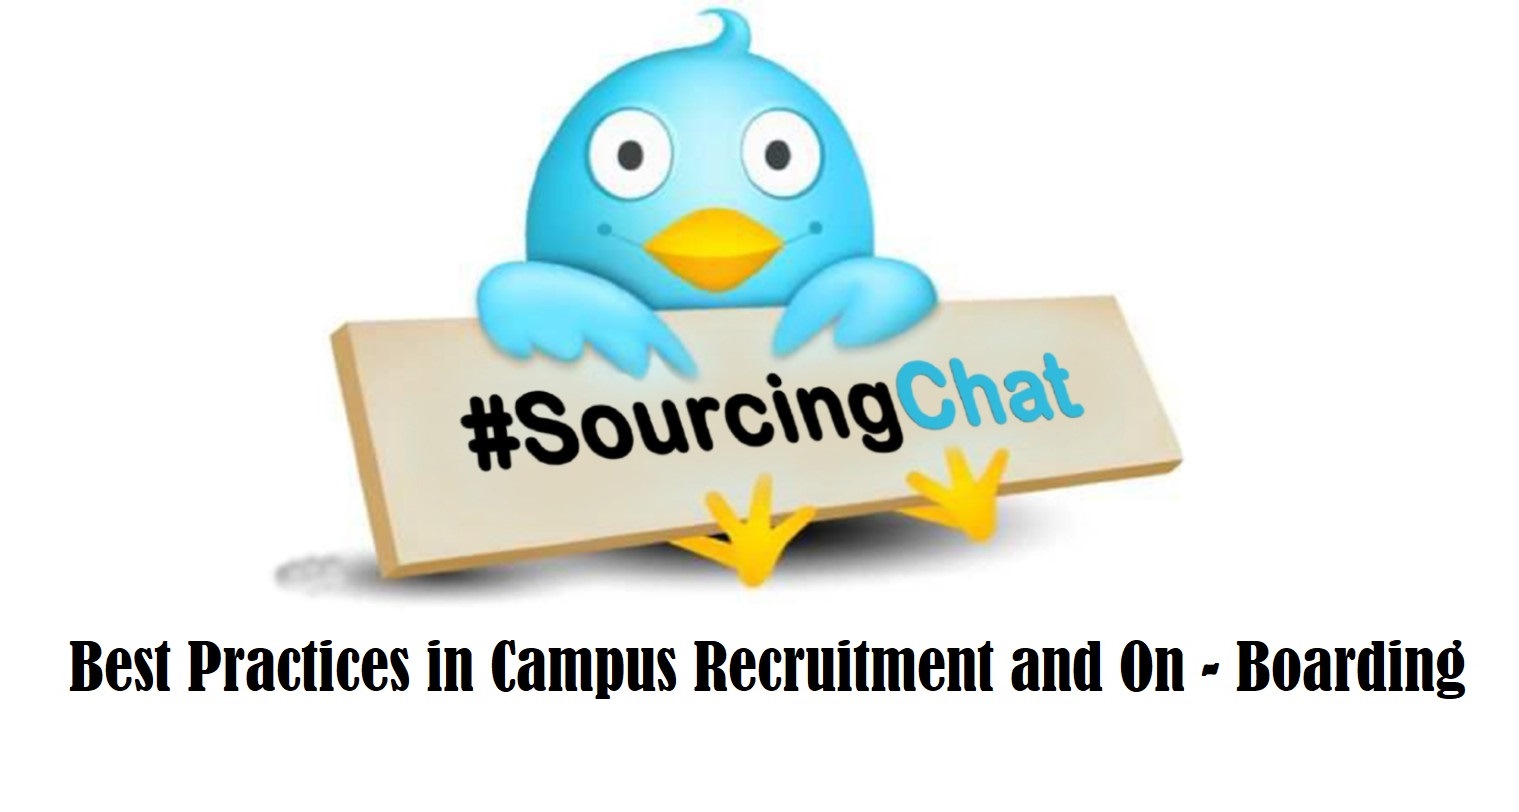 Top Tweets of the #SourcingChat - Best Practices in Campus Recruitment and On - Boarding